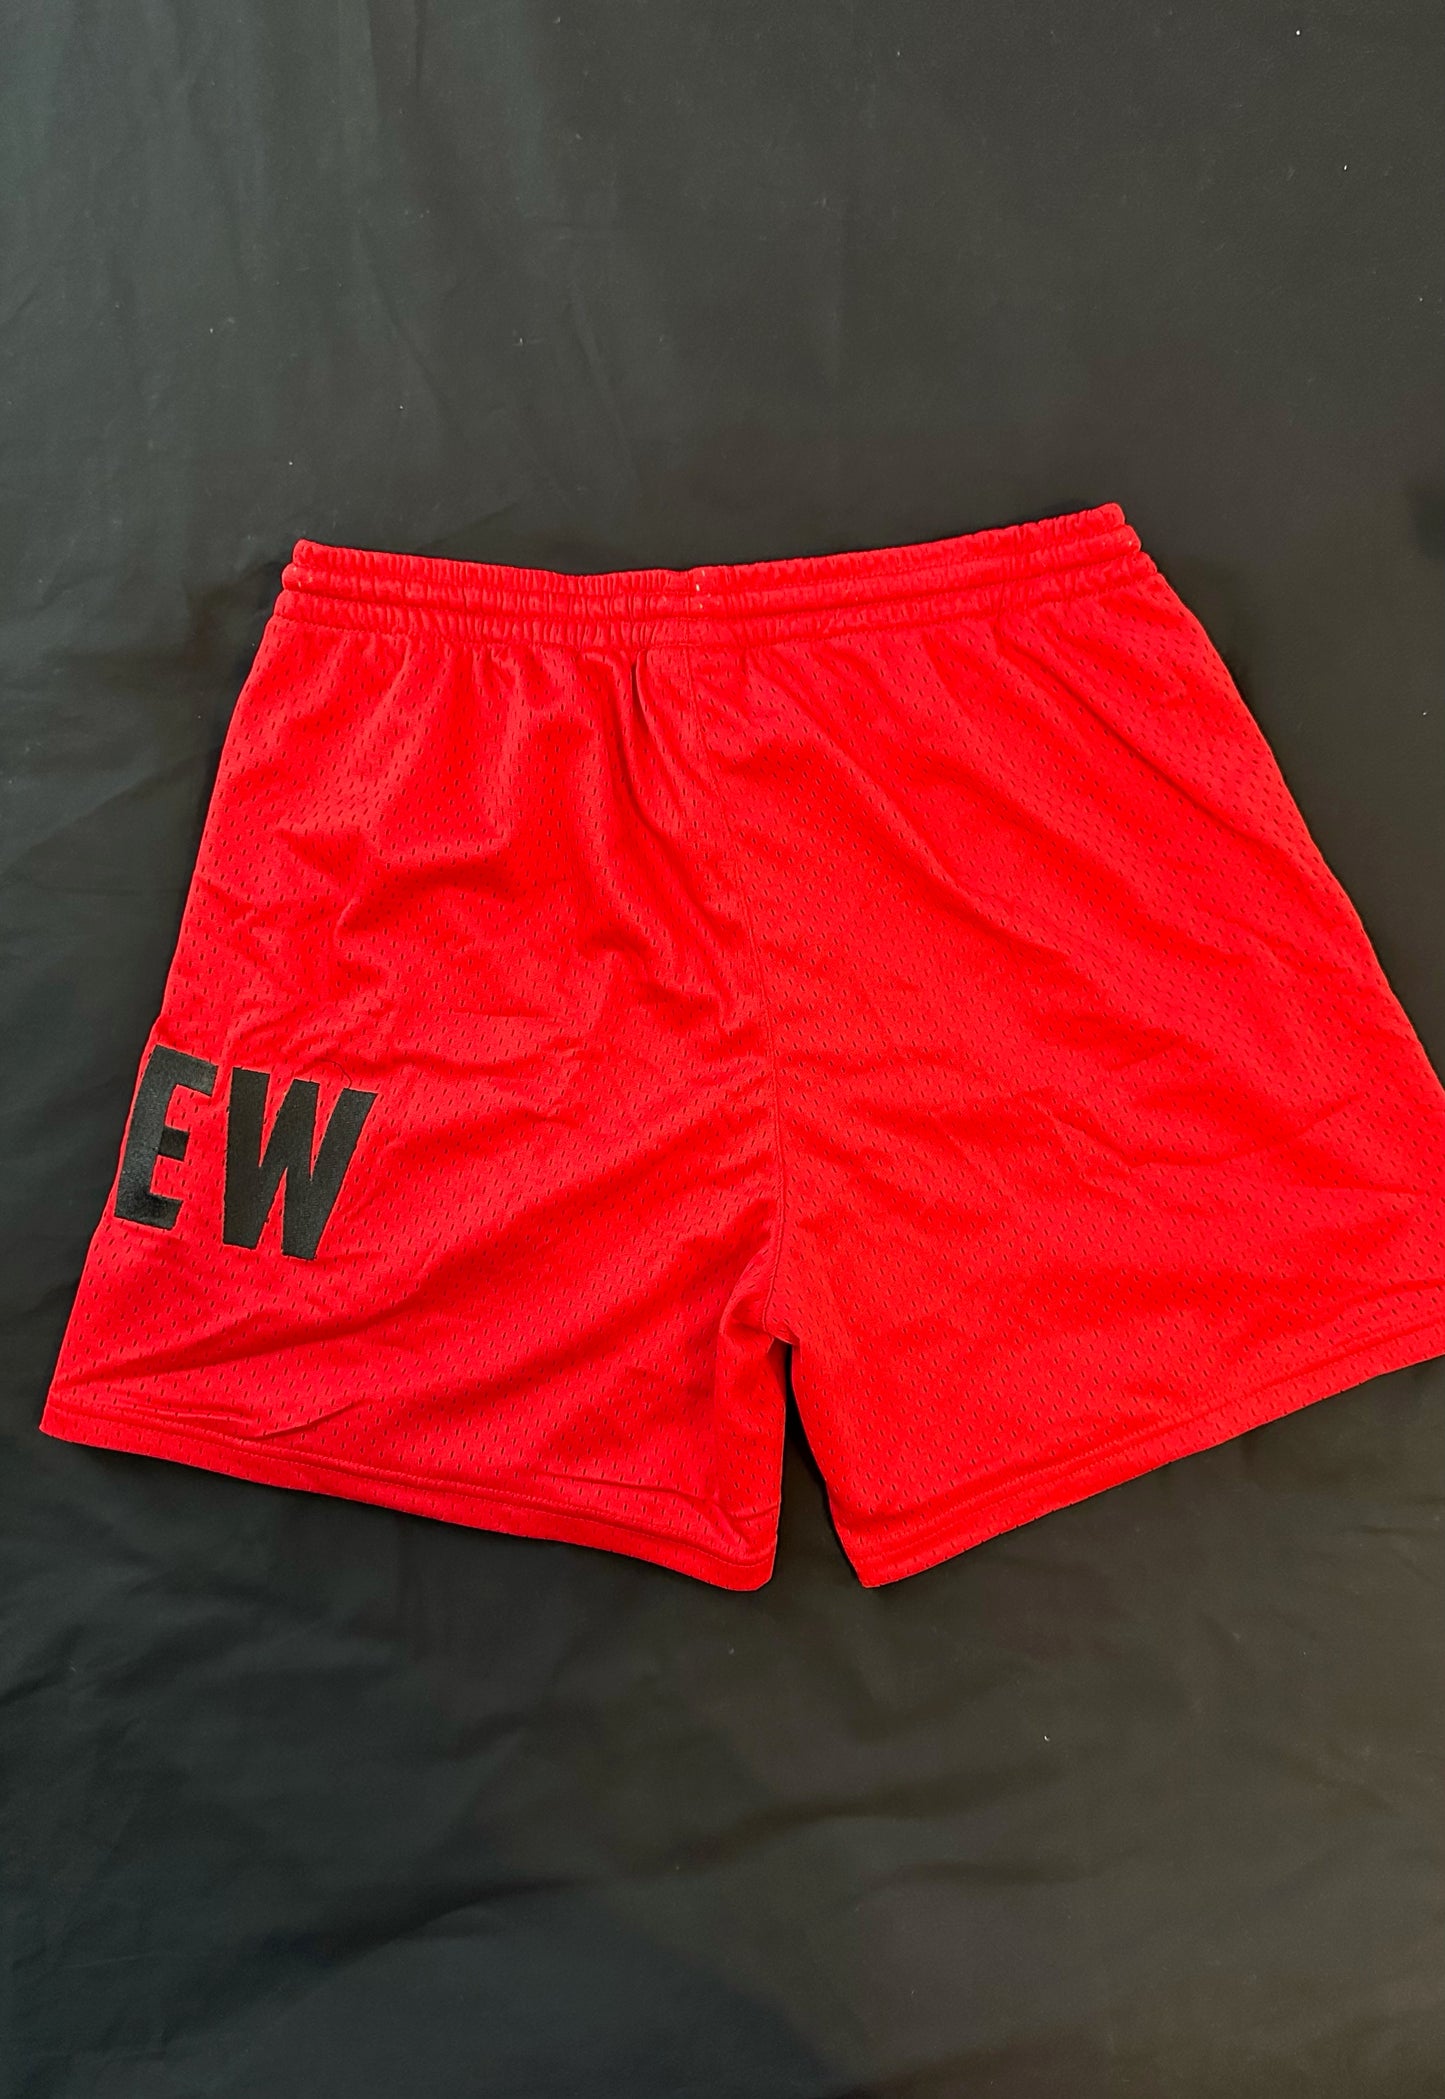 Purew Clothing Red Mesh Shorts